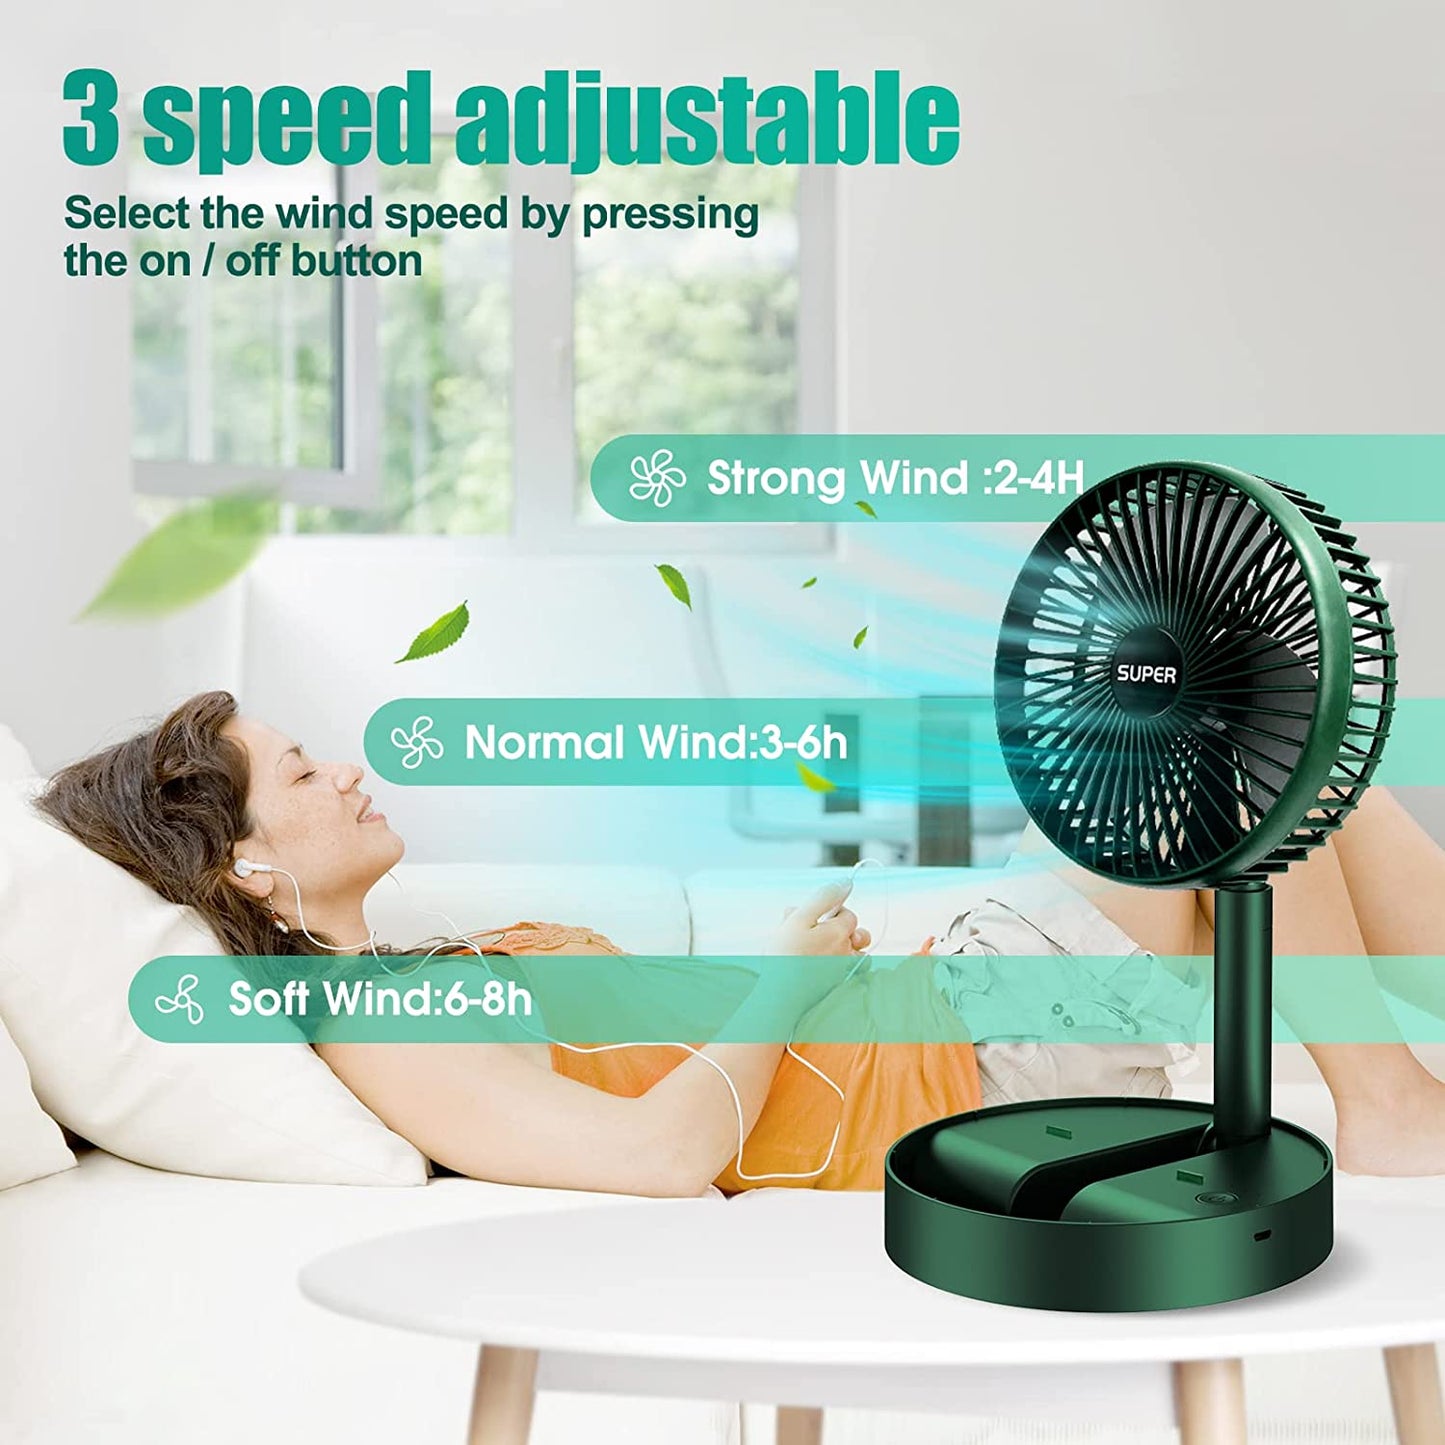 4613 Telescopic Electric Desktop Fan, Height Adjustable, Foldable & Portable for Travel/Carry | Silent Table Top Personal Fan for Bedside, Office Table DeoDap